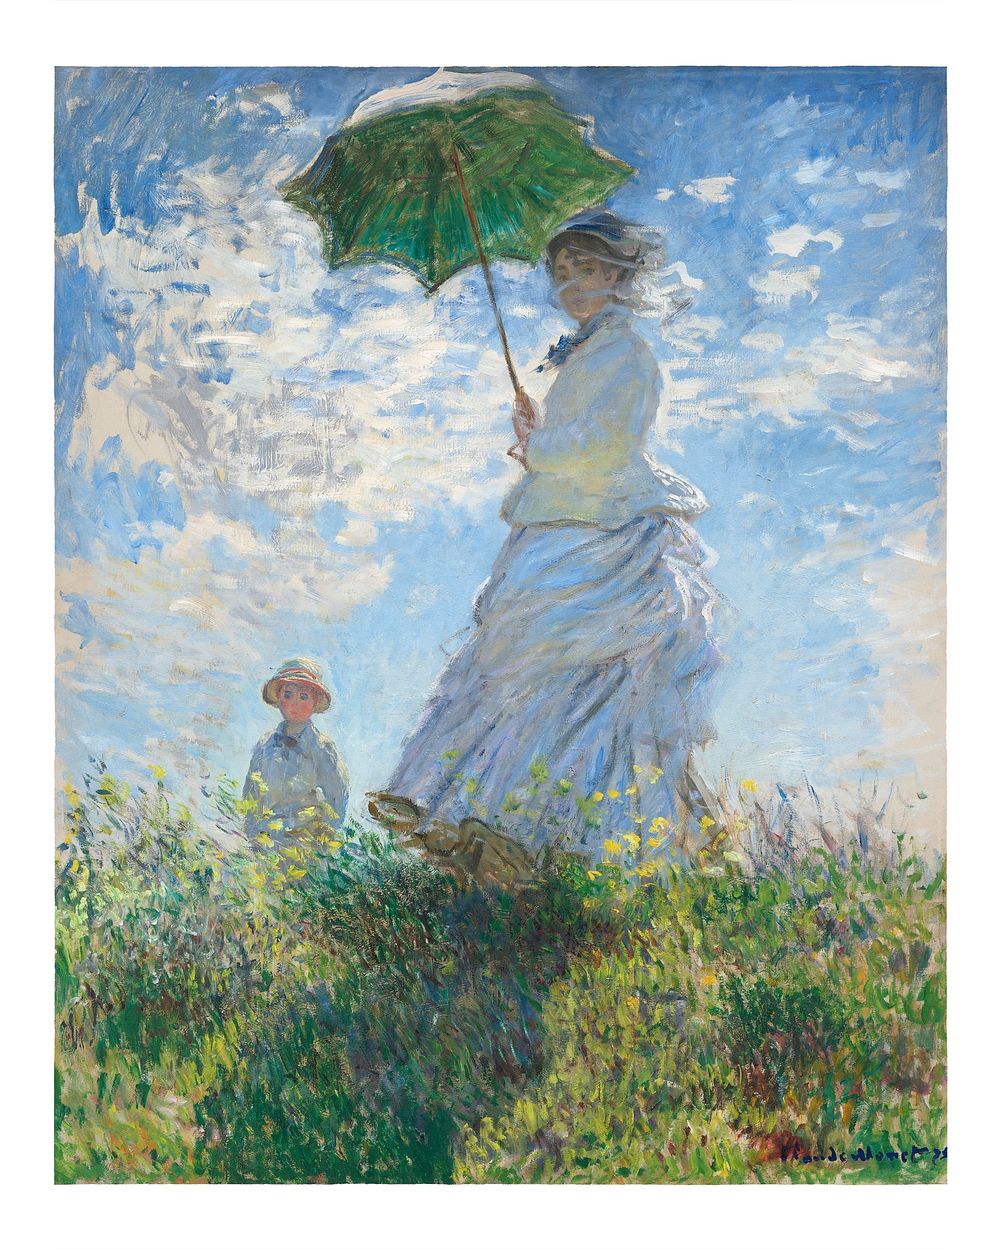 Woman with a Parasol, Madame Monet and Her Son vintage illustration wall art print and poster design remix from original…